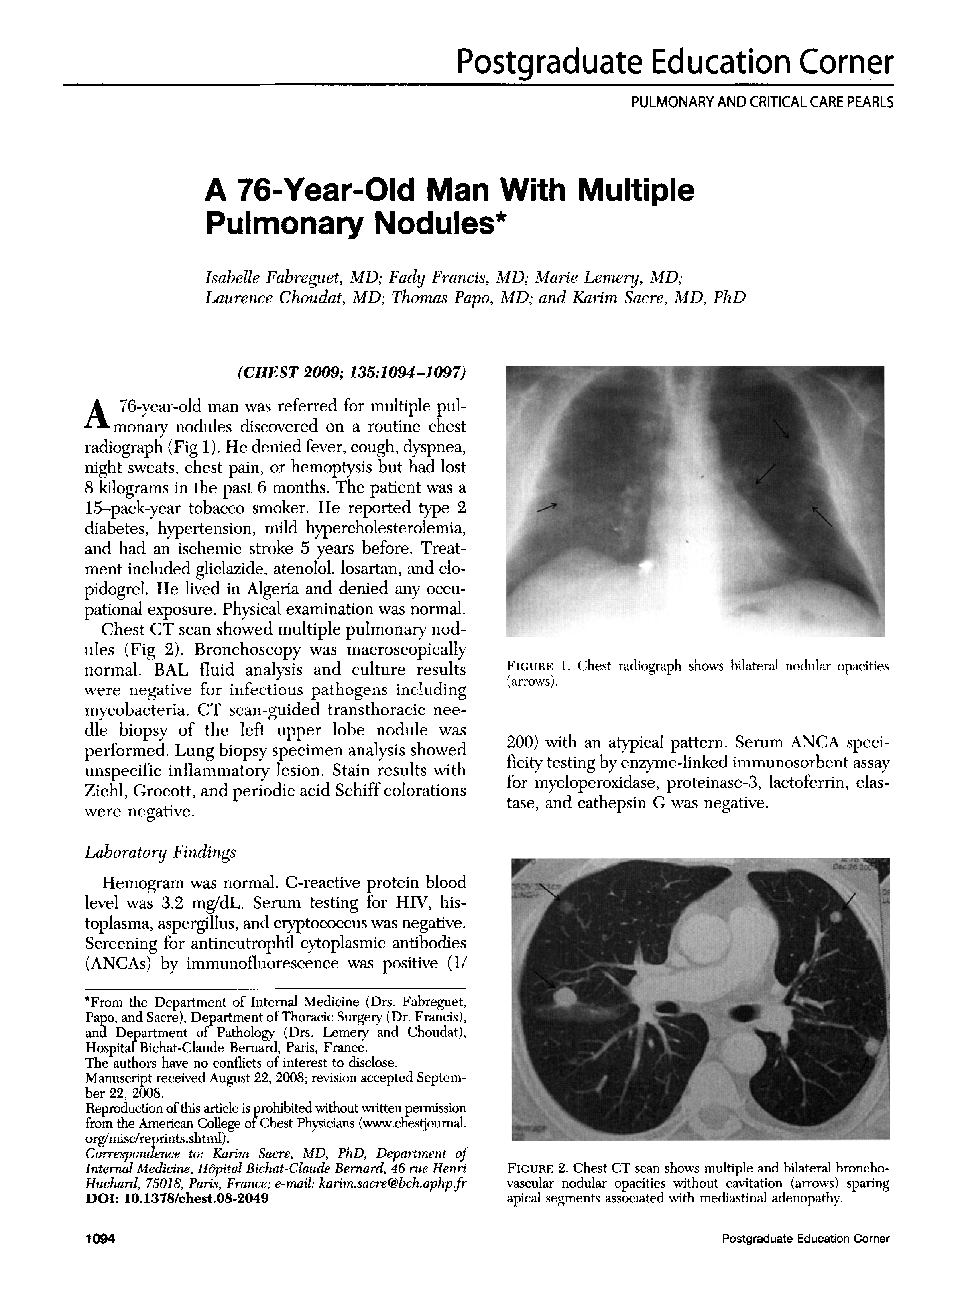 A 76-Year-Old Man With Multiple Pulmonary Nodules